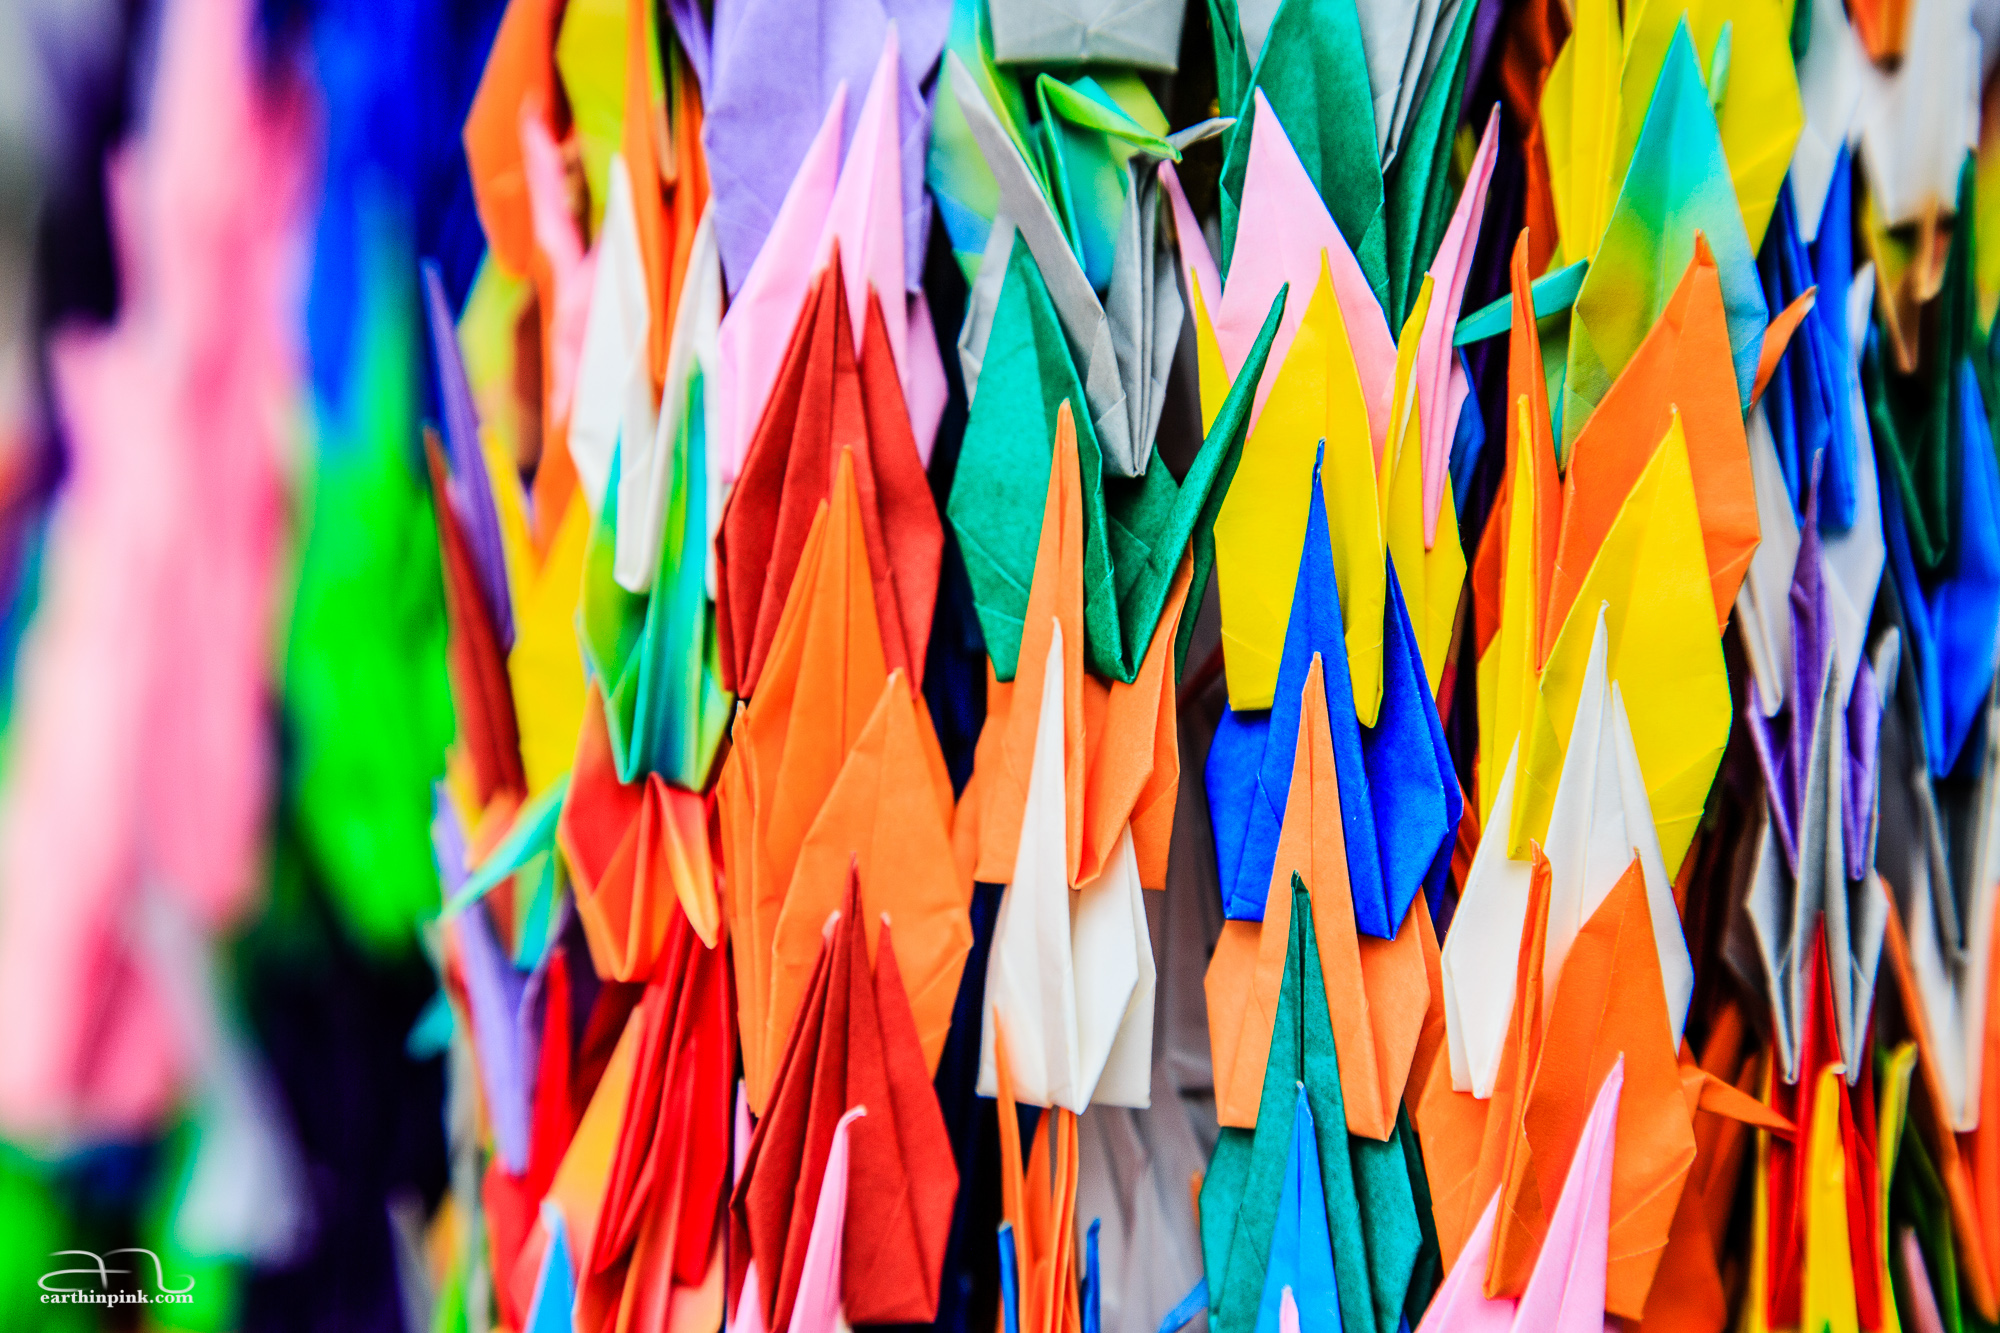 Millions of paper cranes are offered each year to the Hiroshima Peace Memorial Park, as prayers for peace and the end of all the world's conflicts.